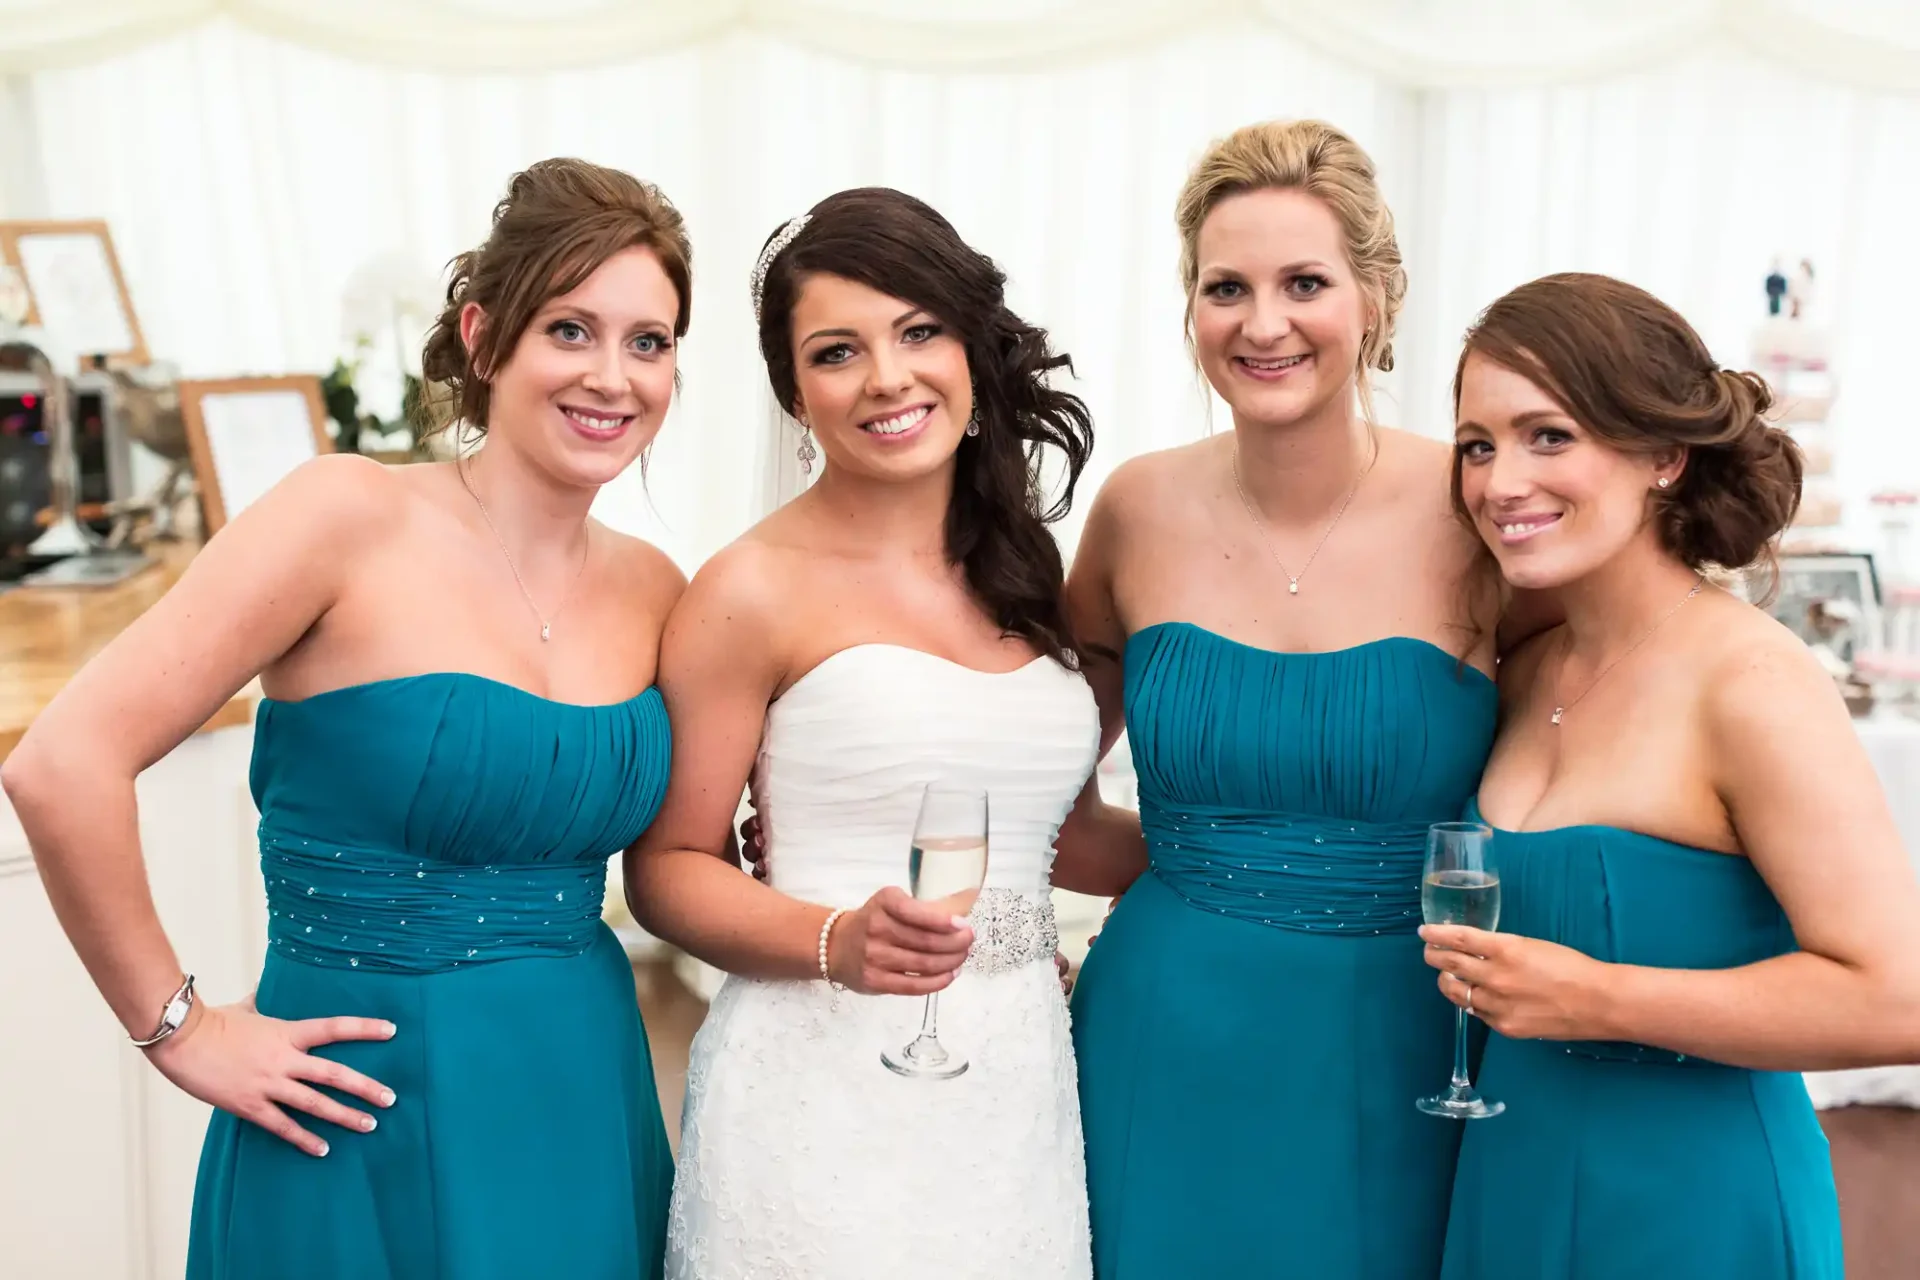 A bride in a white dress and three bridesmaids in teal dresses smiling inside a wedding tent, two holding champagne glasses.